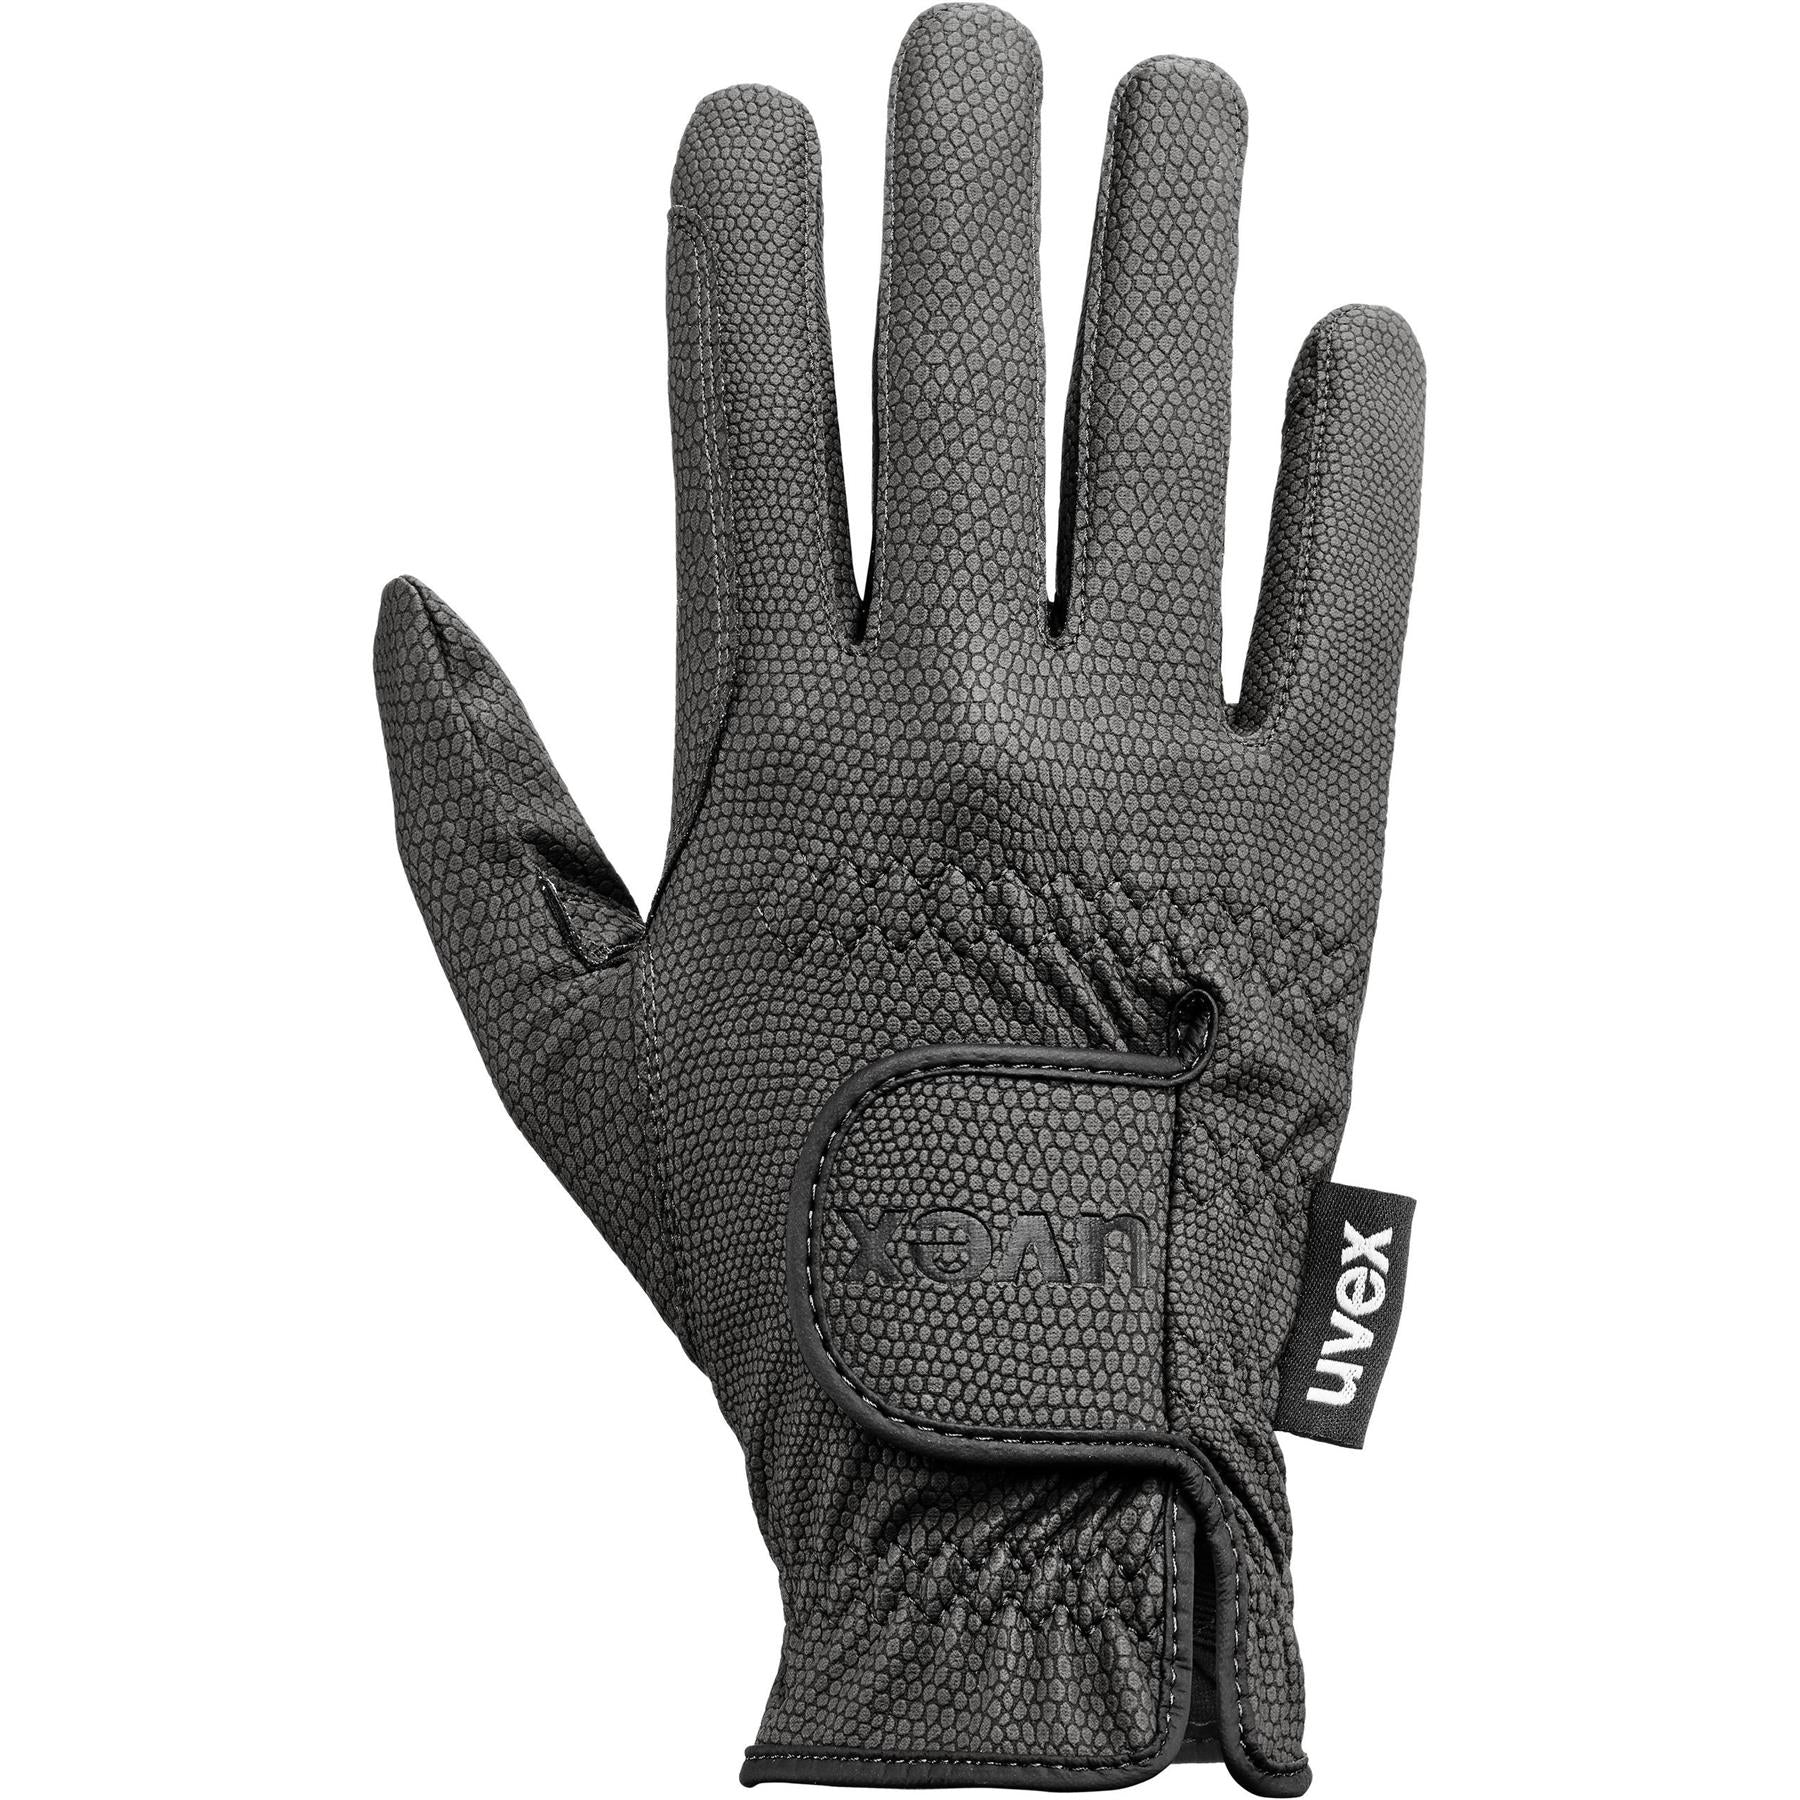 Uvex Sportstyle Horse Riding Gloves - Just Horse Riders